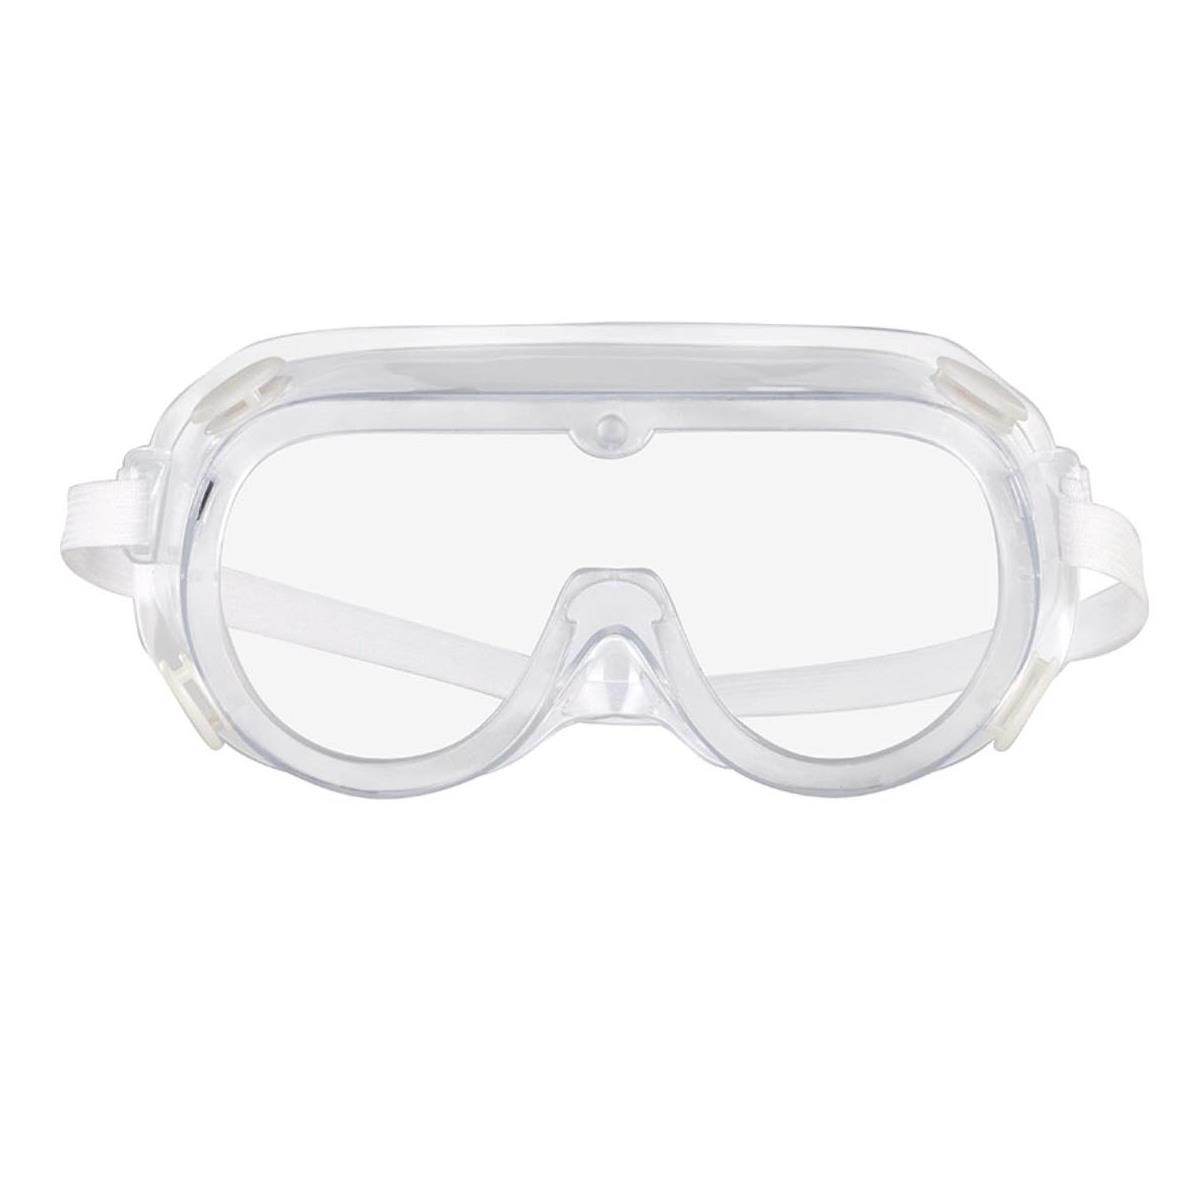 Image of General Brand Protective Clear Safety Goggles